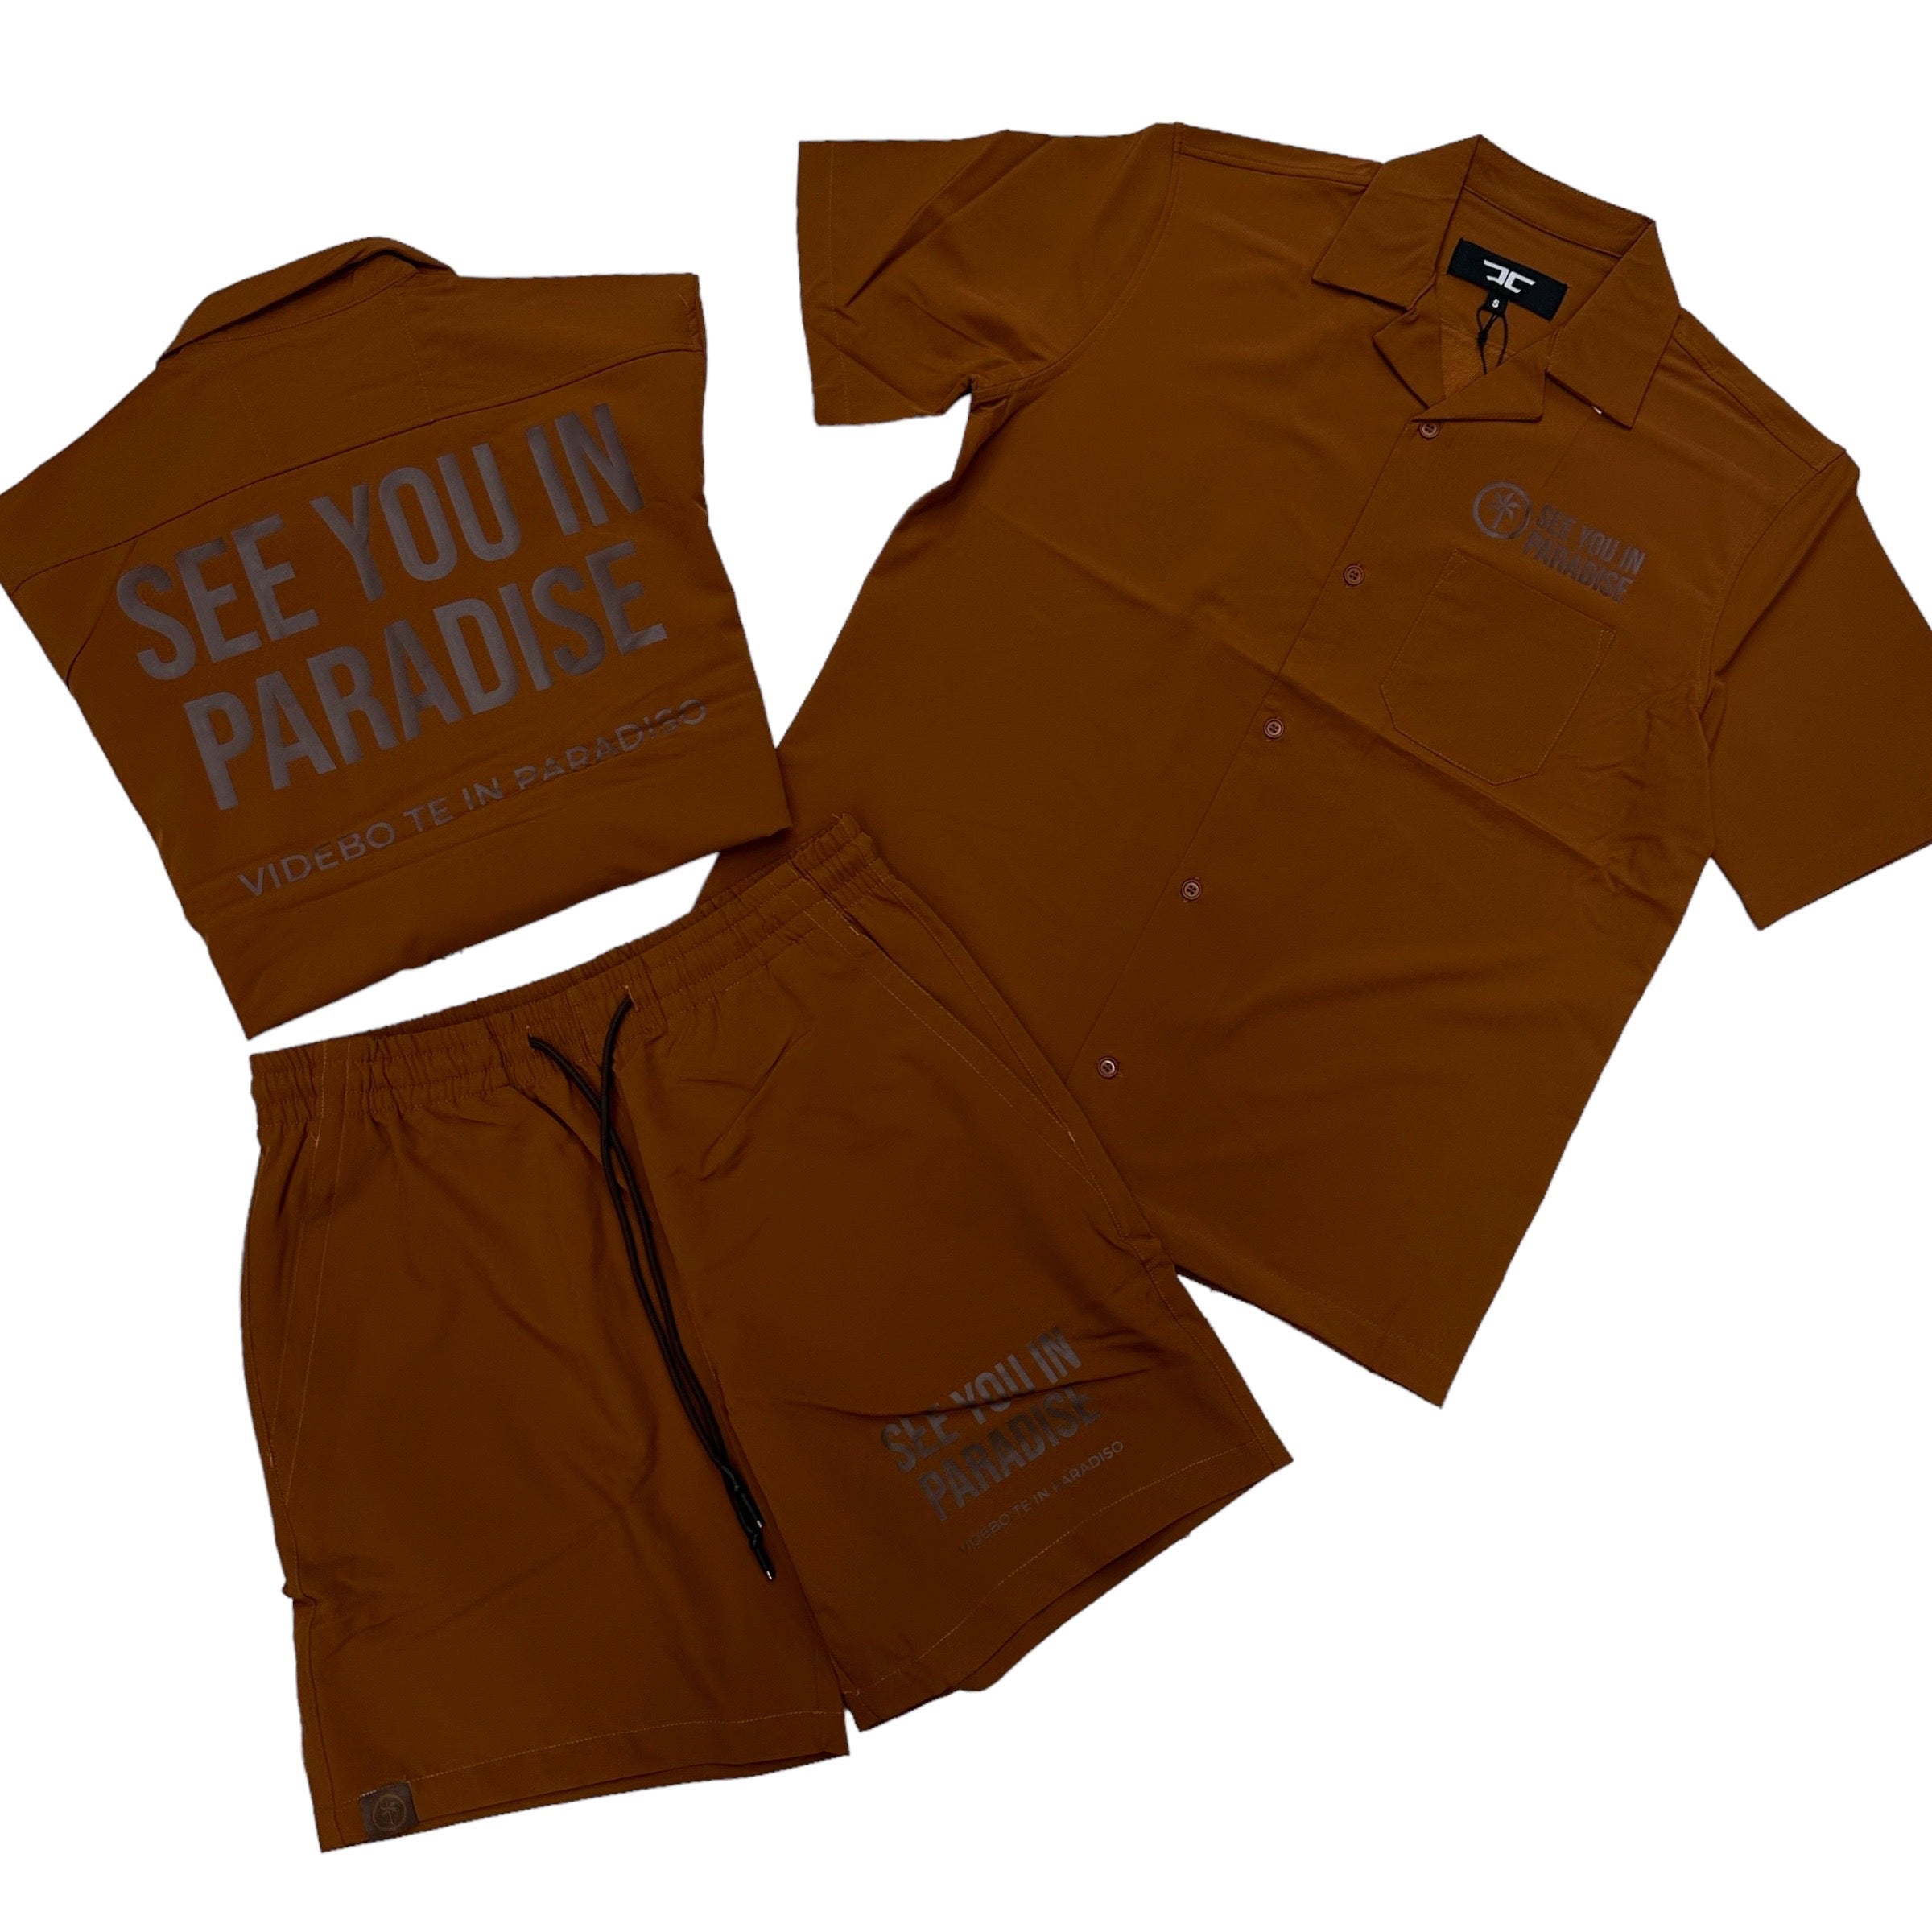 JC See You In Paradise TONE Shirt Set Chocolate 2554